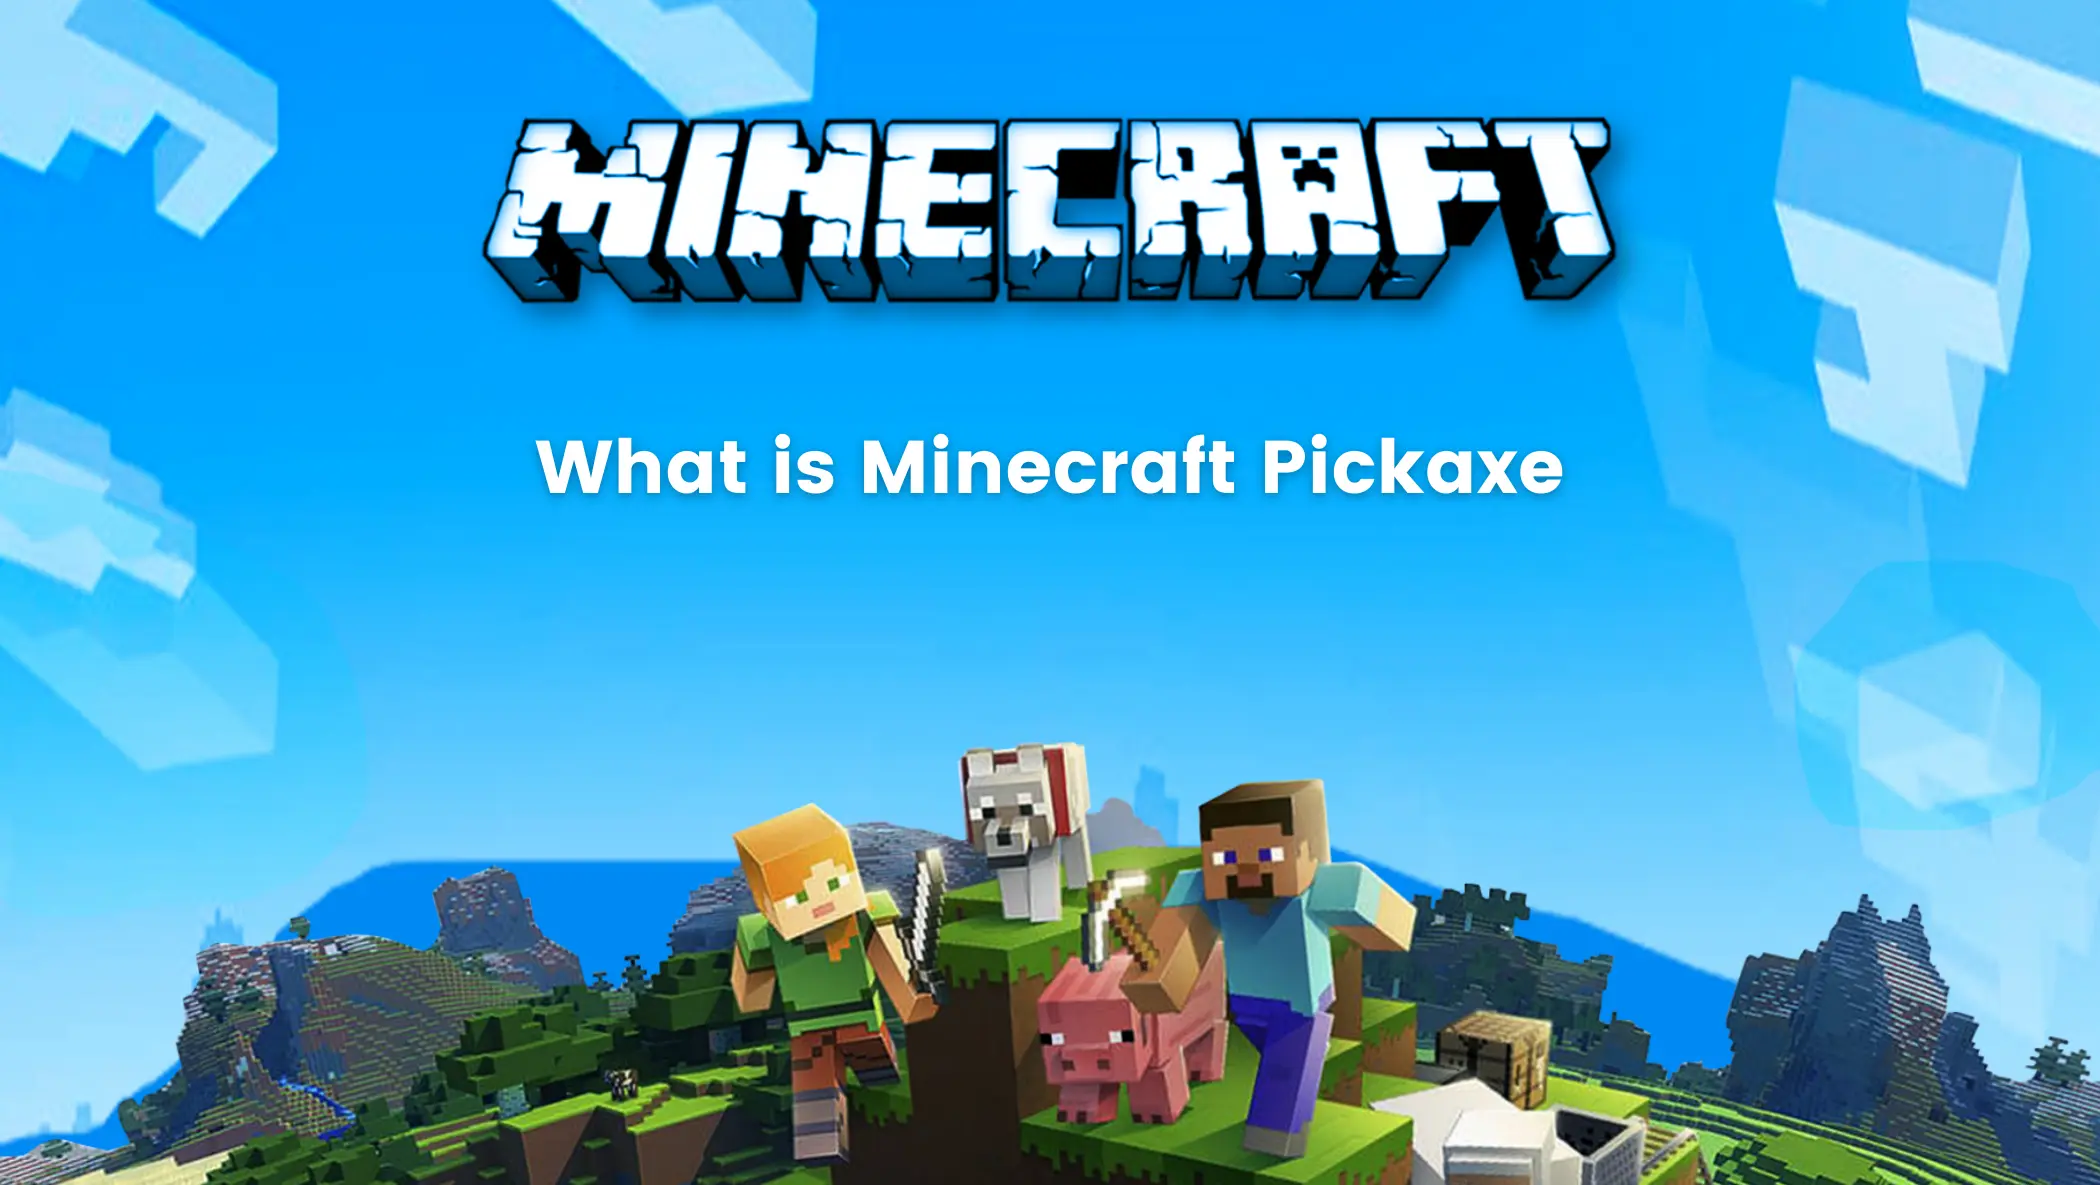 What is Minecraft Pickaxe